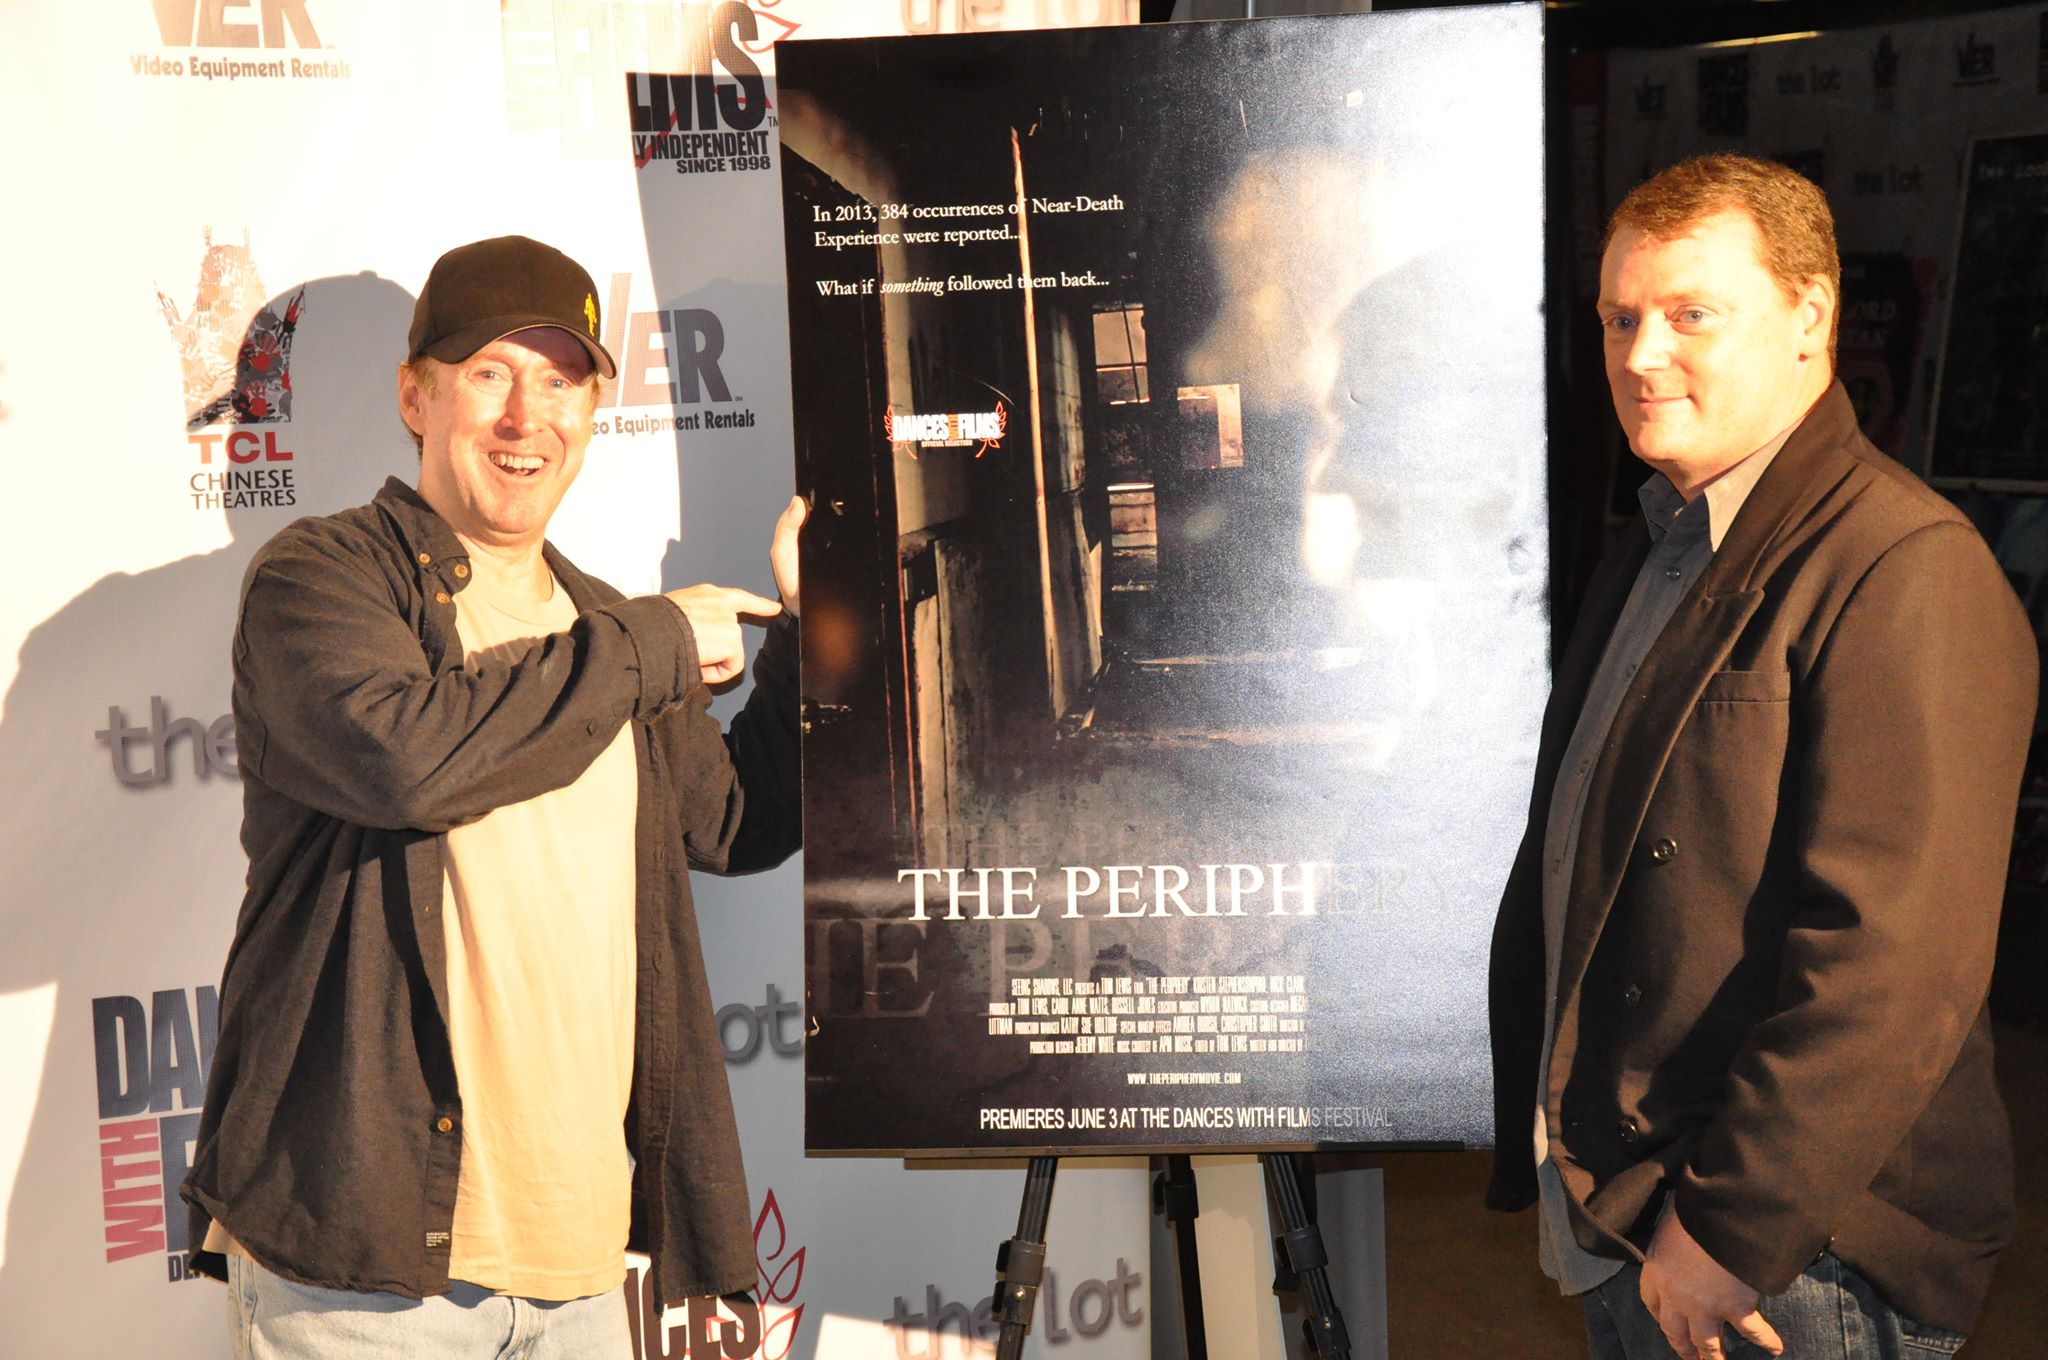 Director / Producer Tom Lewis & Producer - Russell Jones on the red carpet for the 